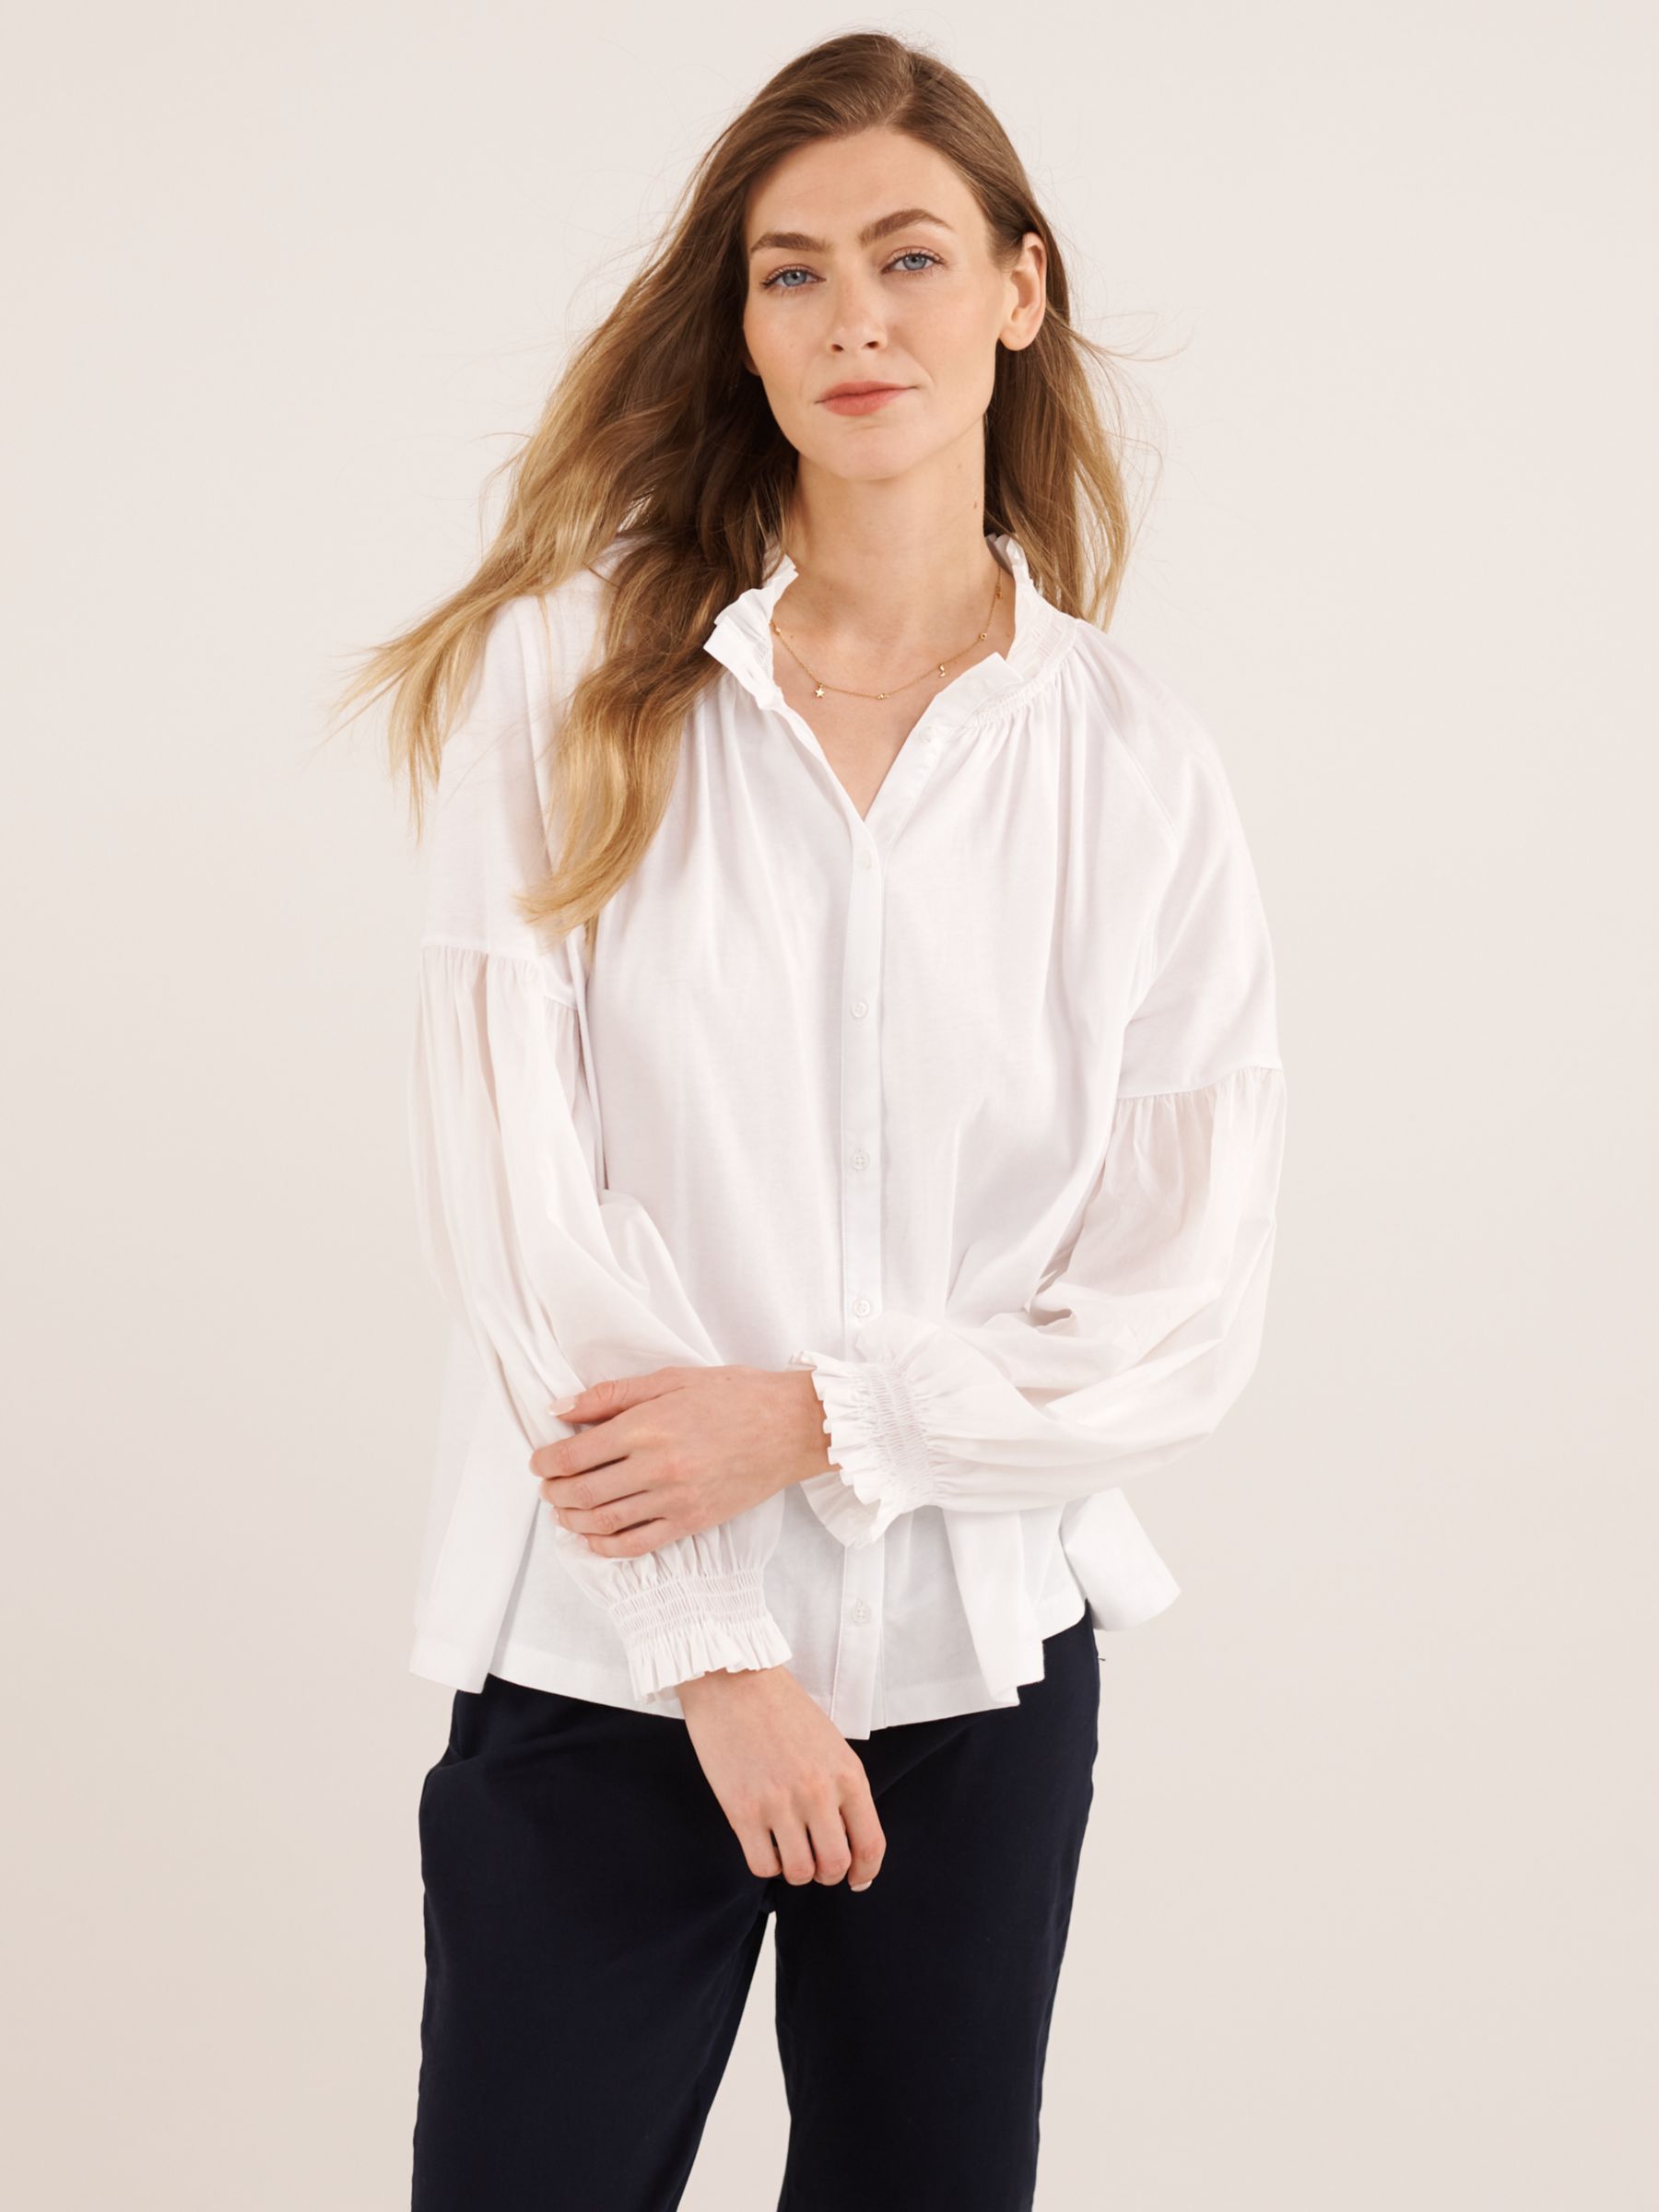 NRBY Esther Cotton Oversized Shirt, White, L